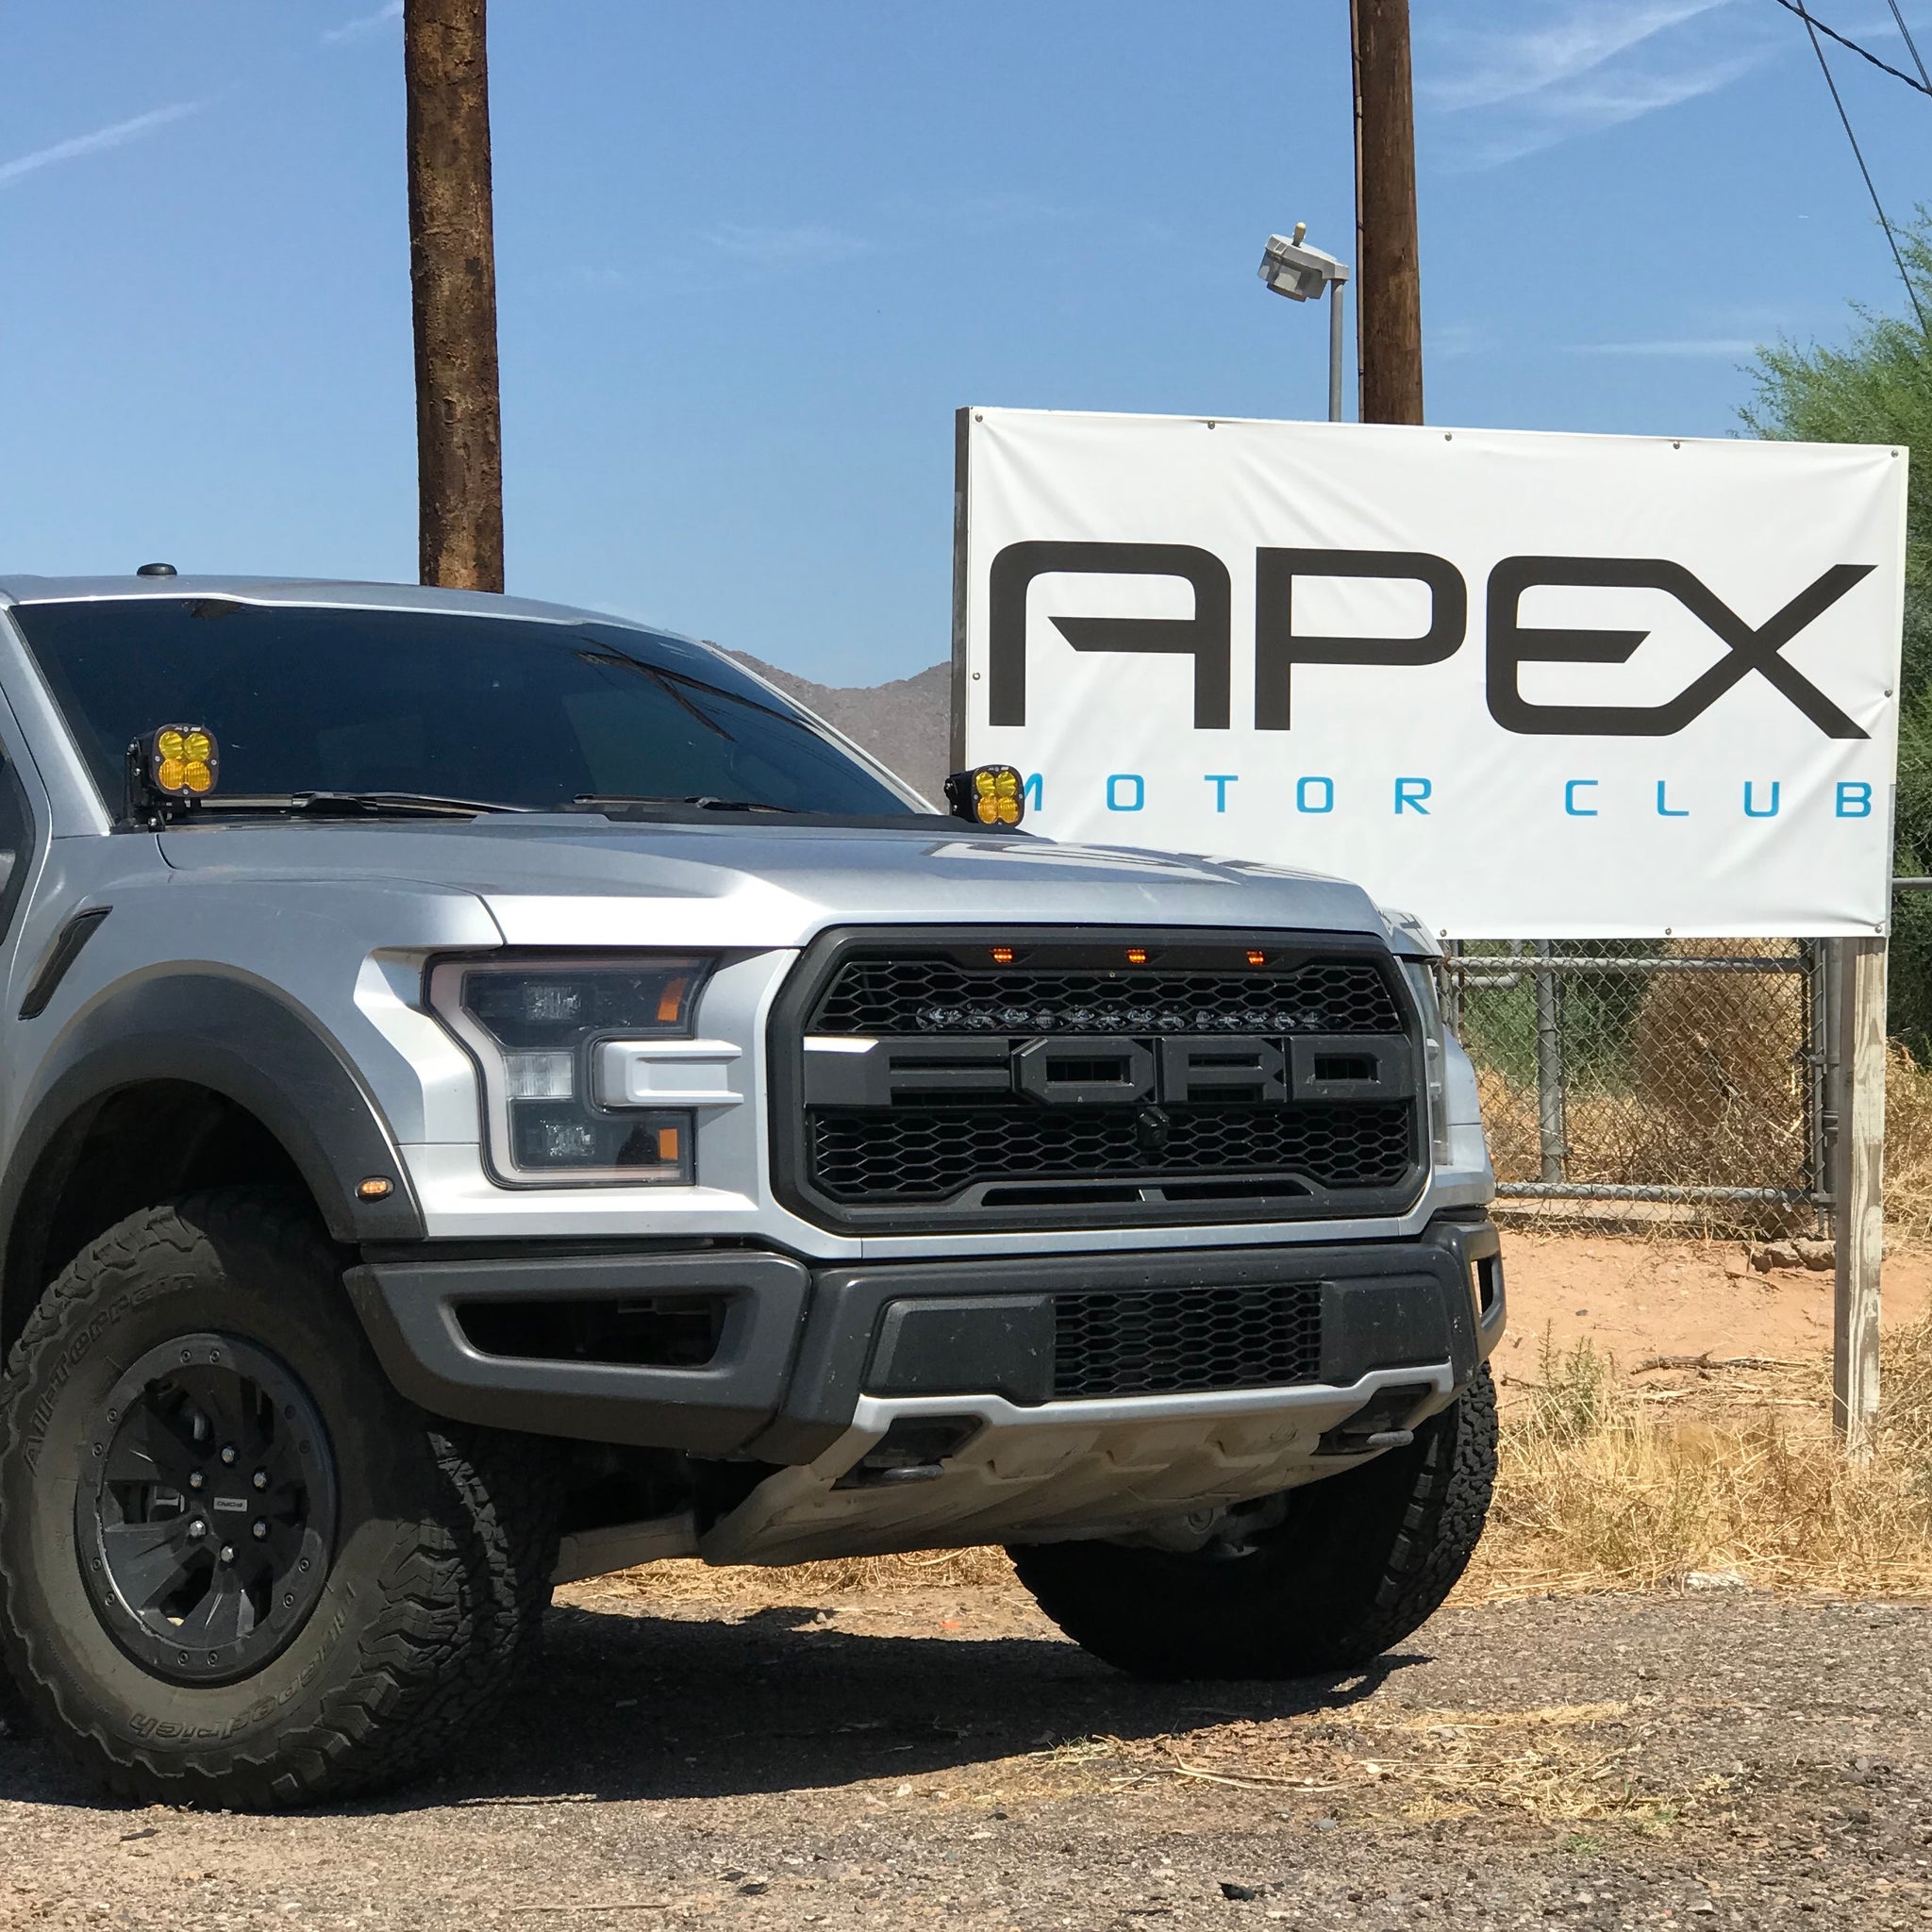 Sept 22nd AZRR Offroad Event with APEX Motor Club